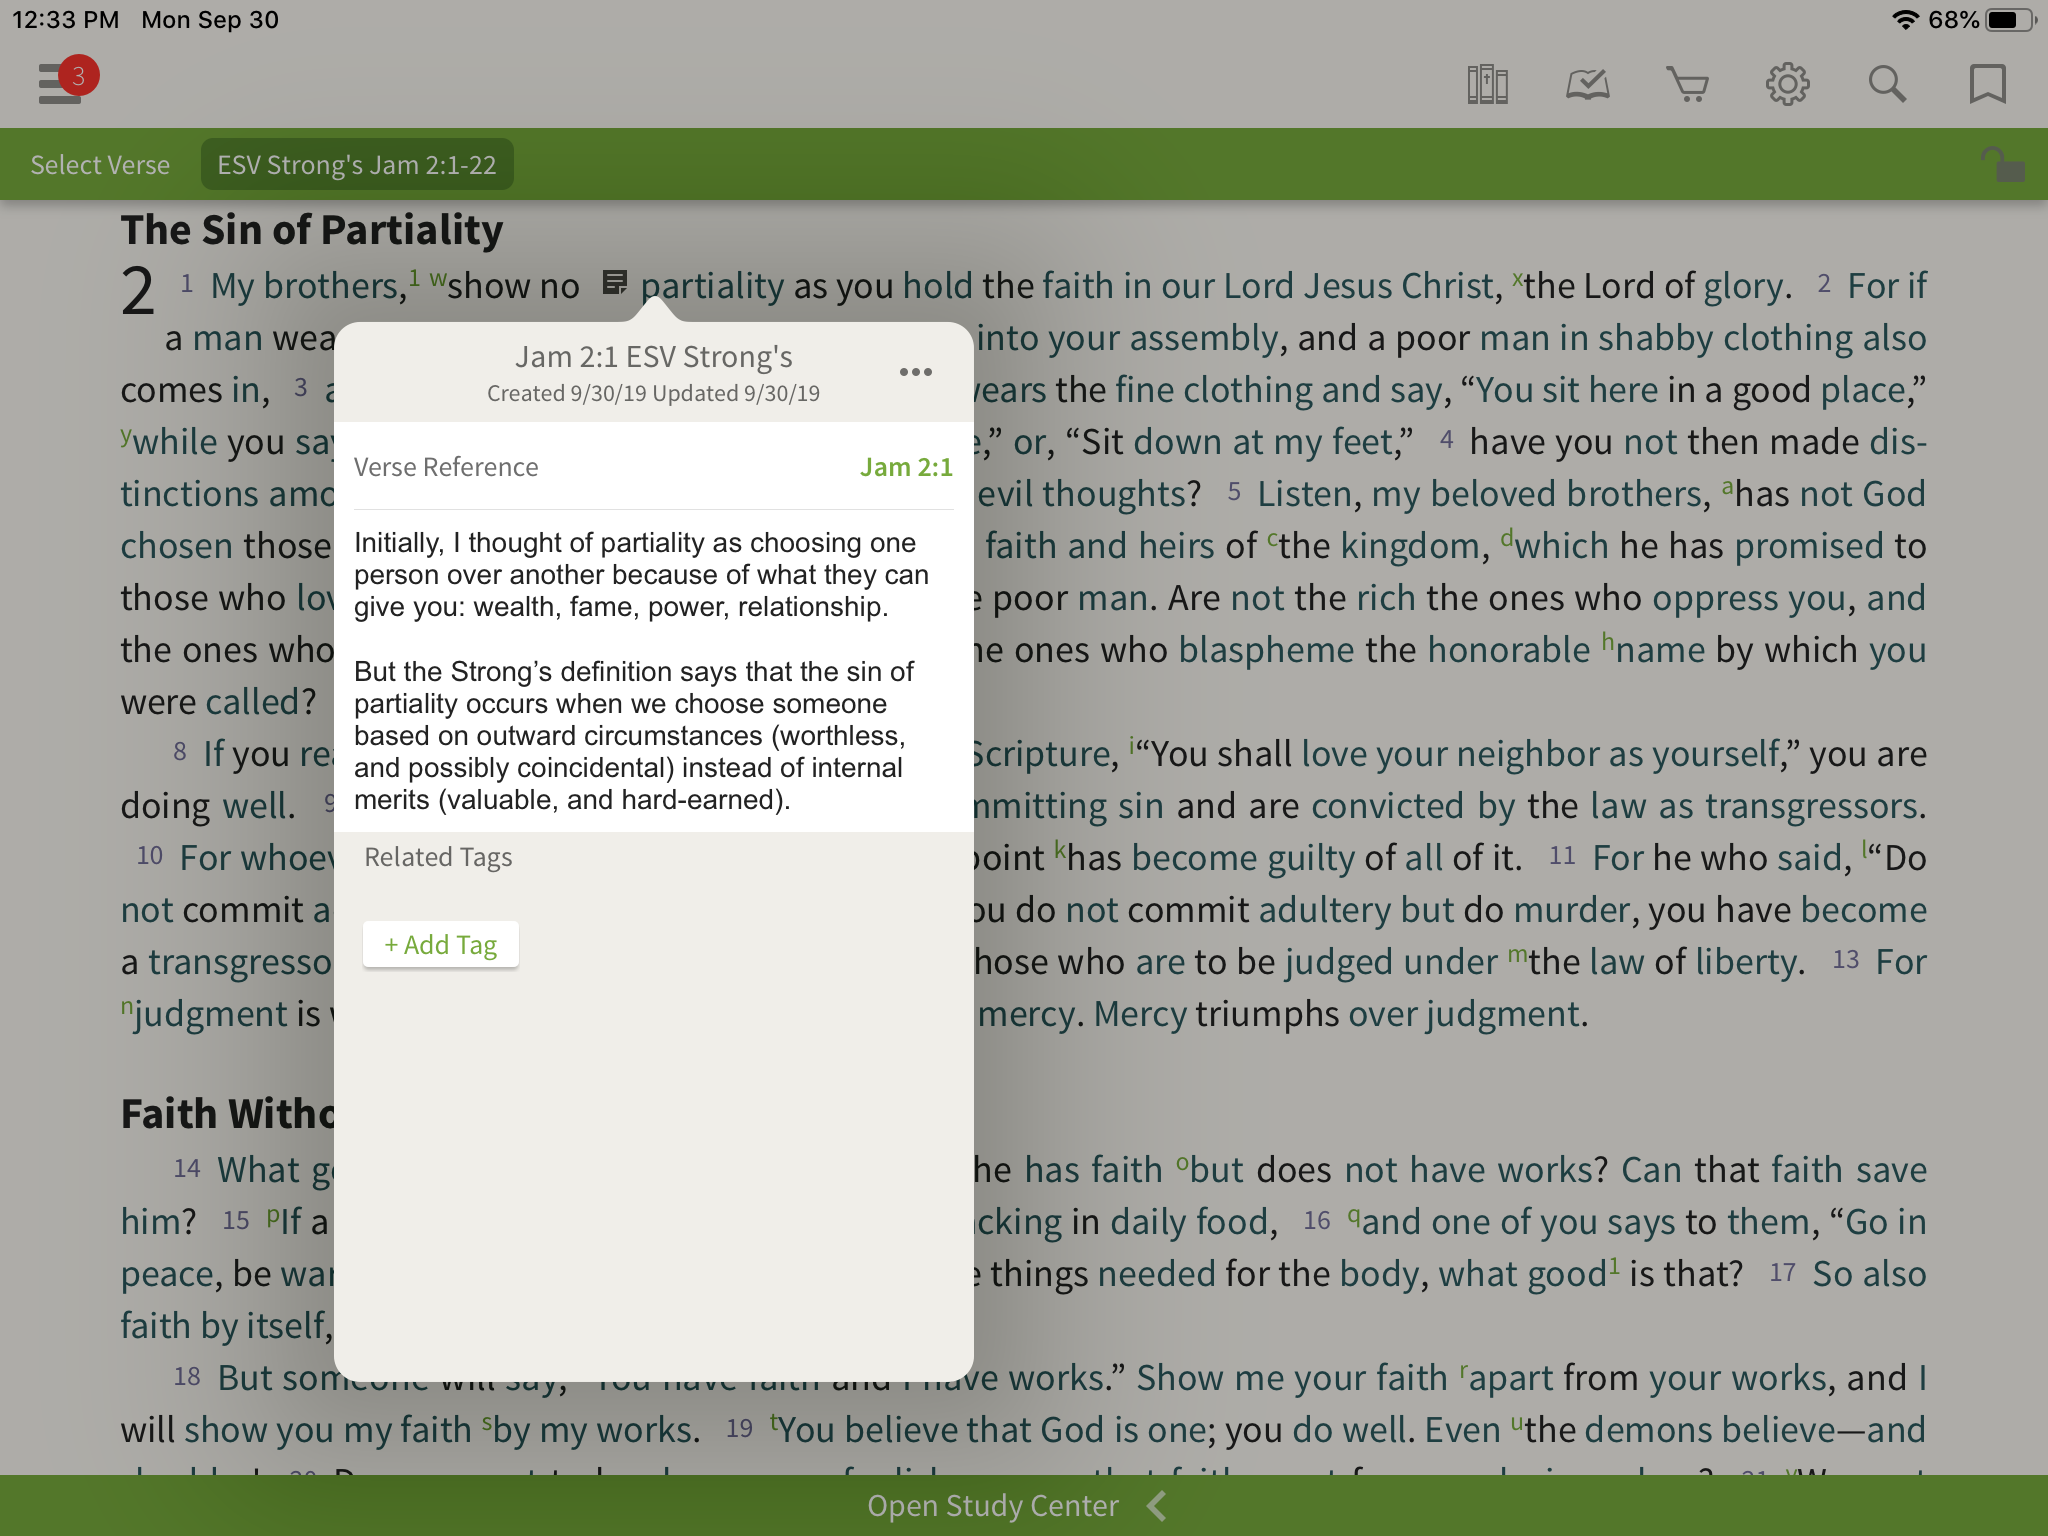 Taking Notes in the Olive Tree Bible App